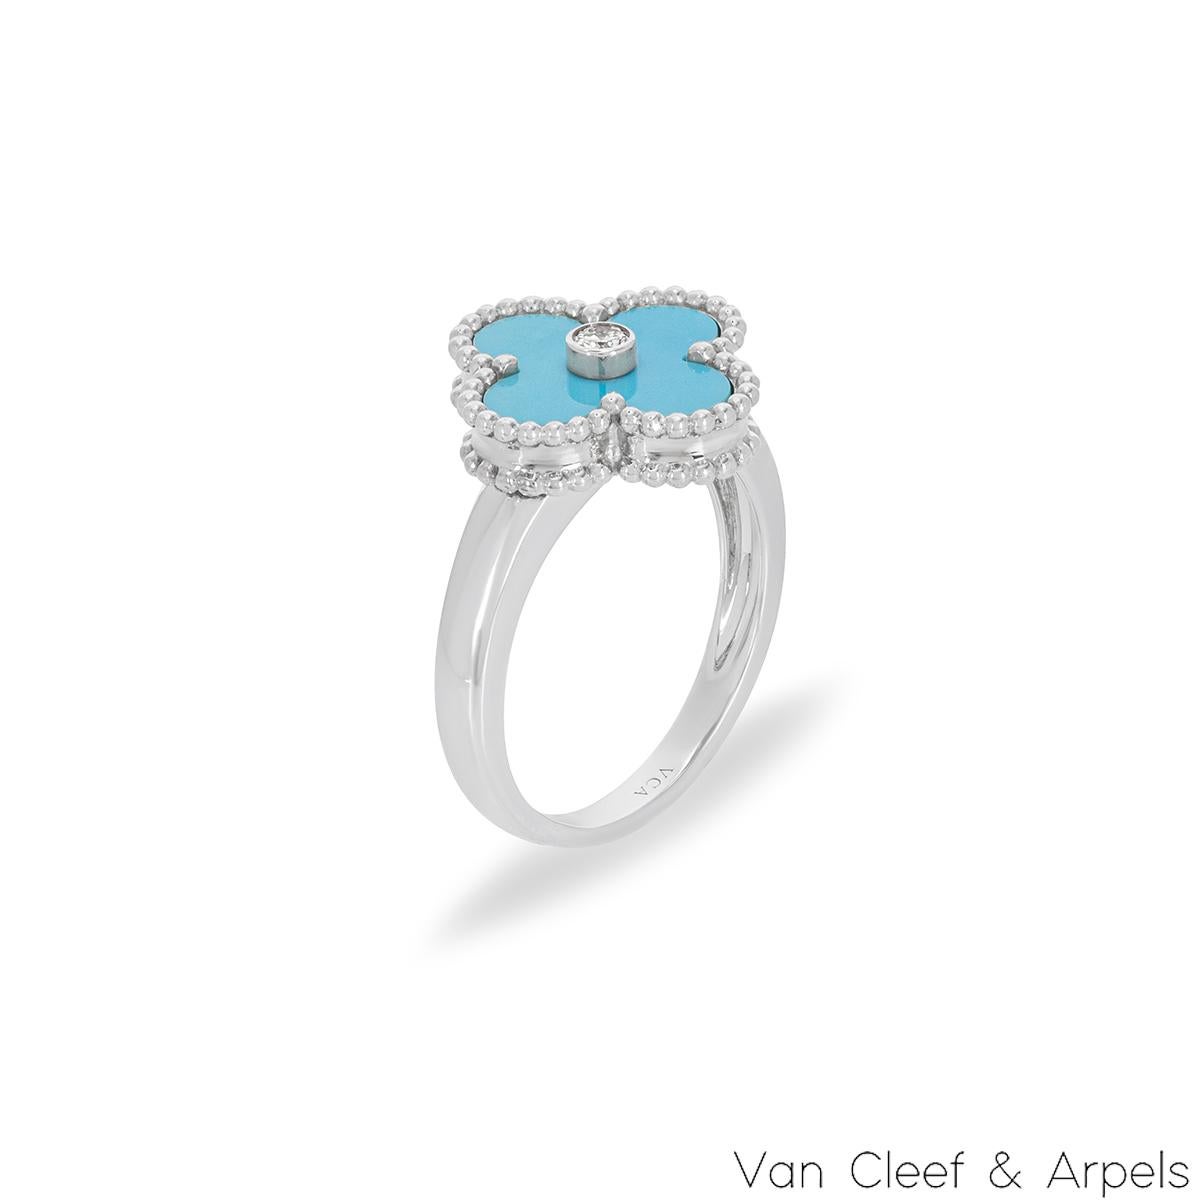 A rare 18k white gold turquoise ring by Van Cleef & Arpels from the Vintage Alhambra collection. The ring features the iconic 4-leaf clover motif with a turquoise inlay, complemented by a beaded edge and a round brilliant cut diamond set to the